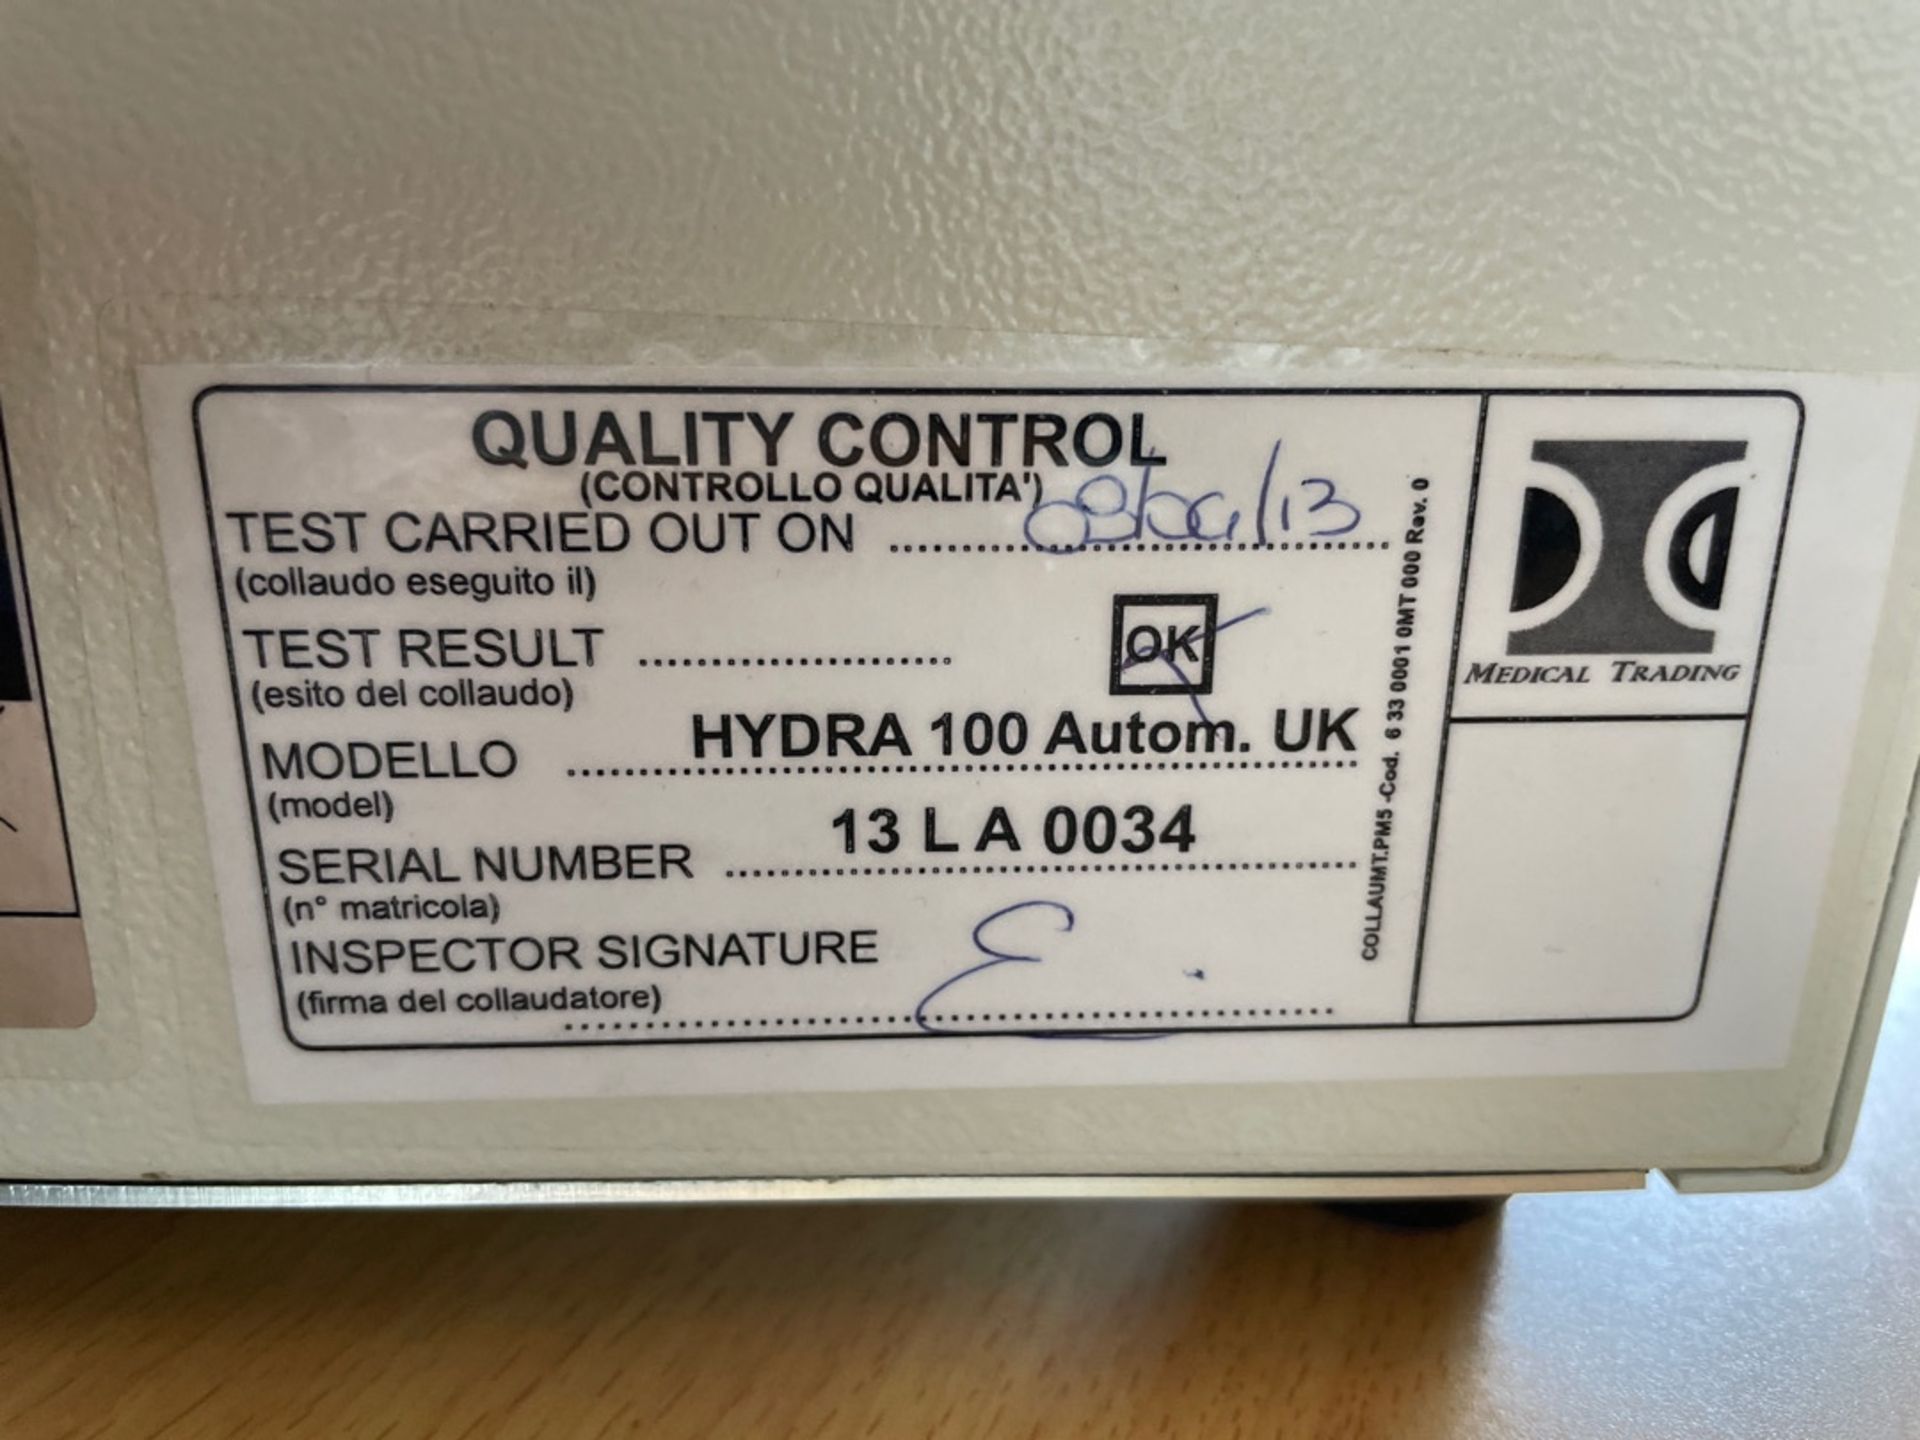 Medical Trading Hydra 100 Automatic Autoclave - Image 4 of 4